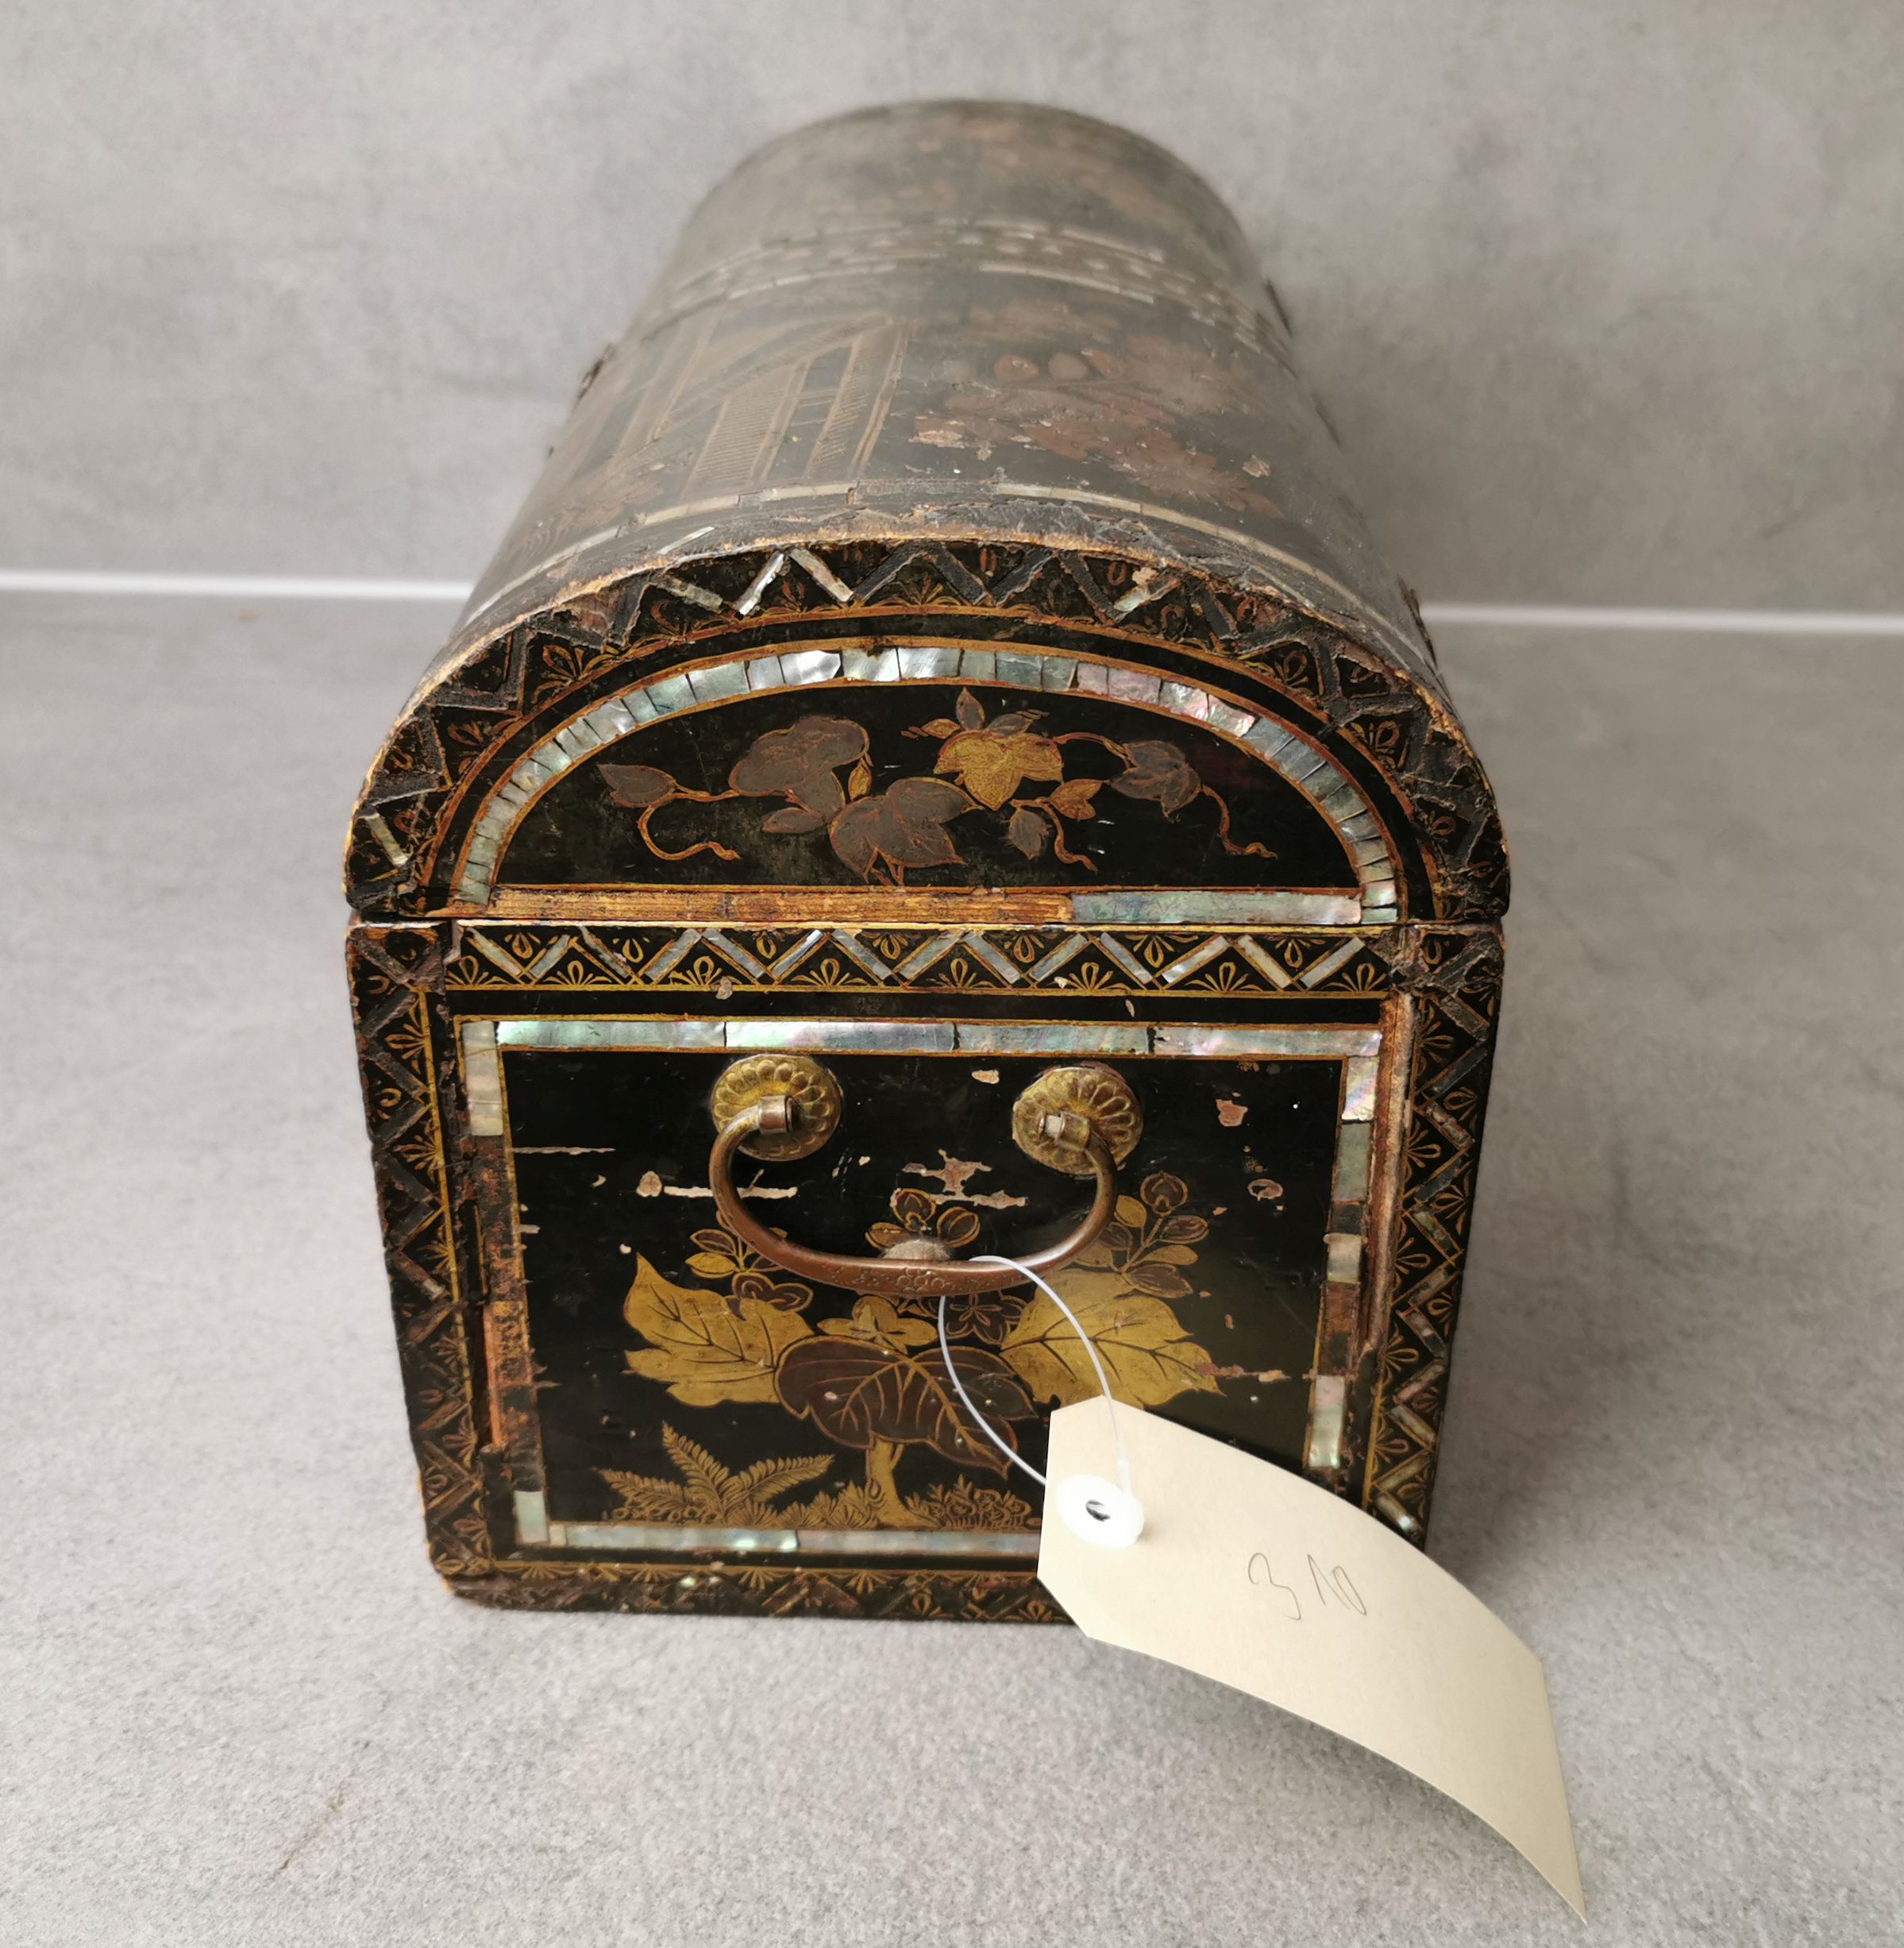 ASIAN LACQUER WORK: SMALL ROUND-LIDDED BOX - Image 3 of 4